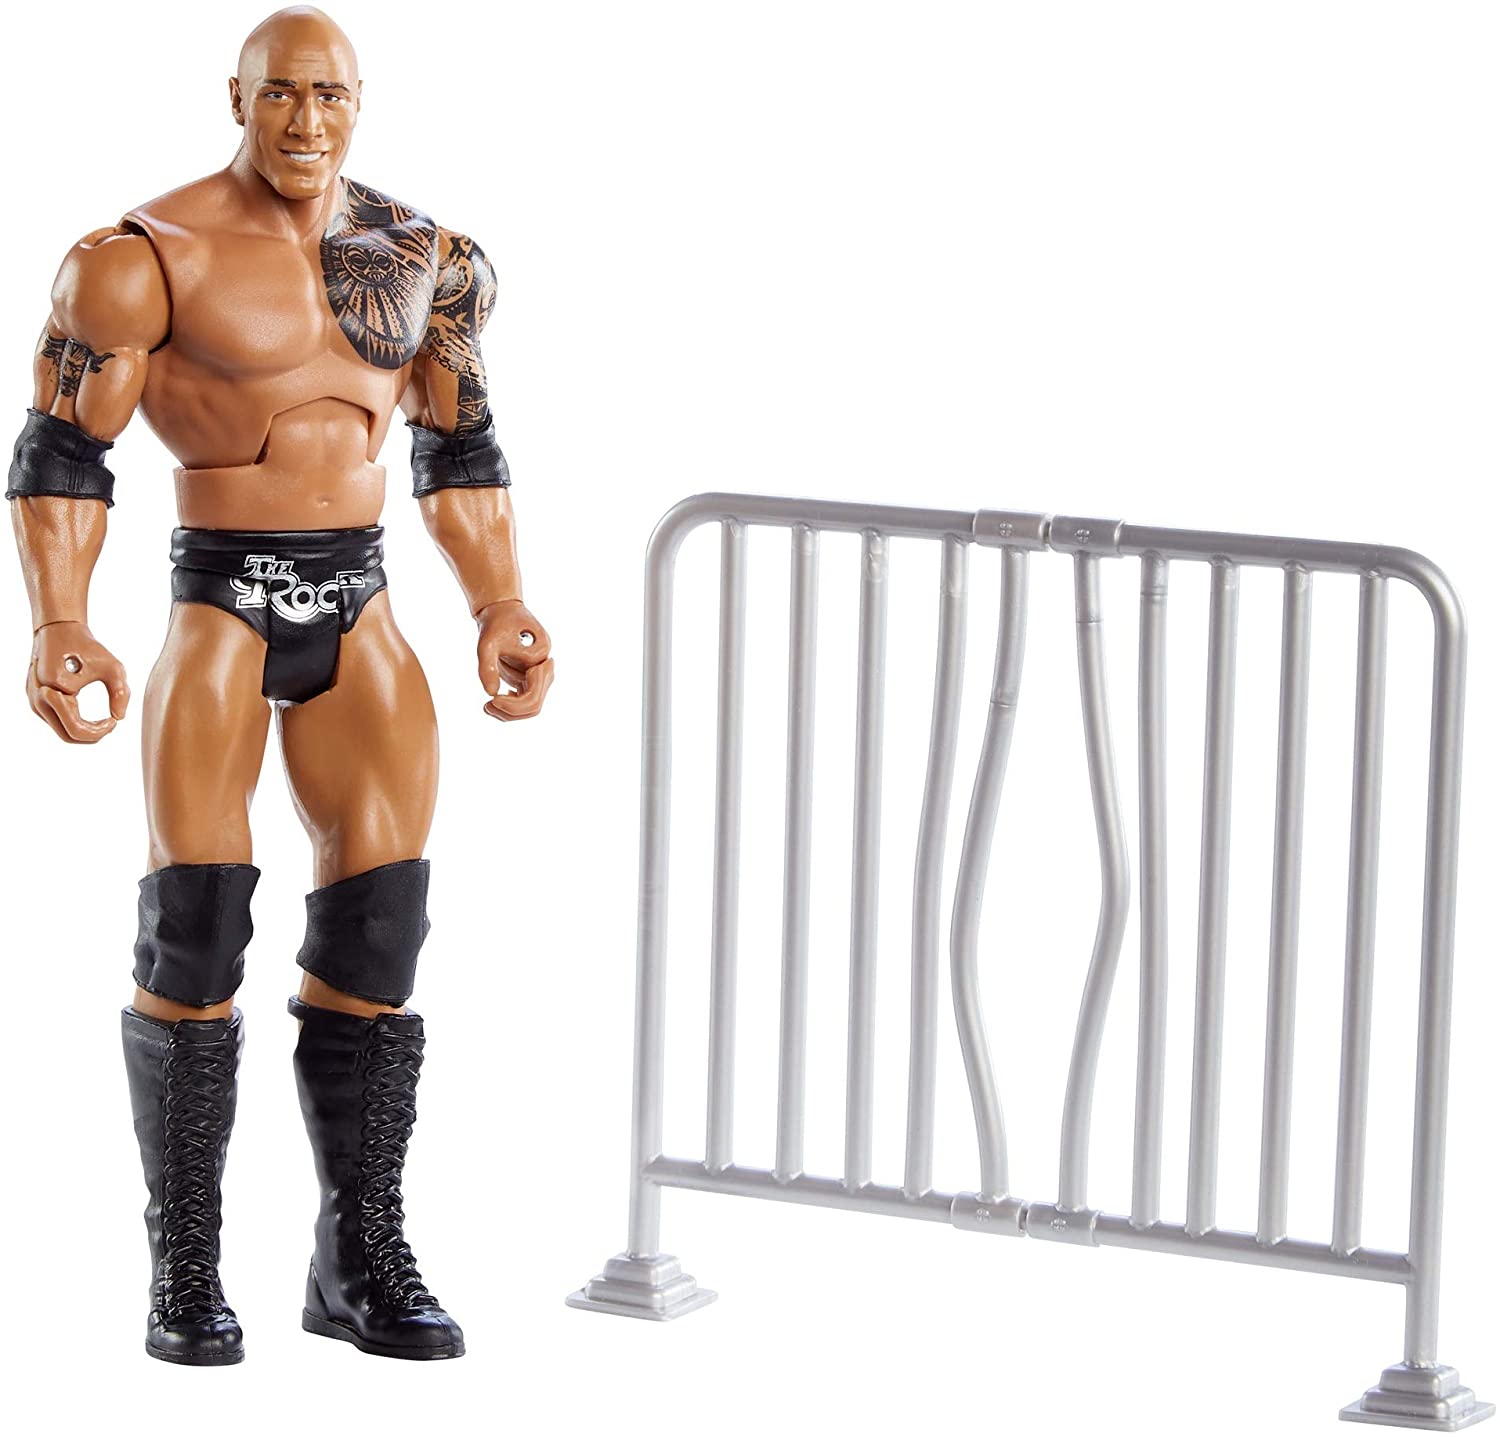 Amazoncom WWE Wrekkin The Rock 6 inch Action Figure with Pull 1500x1437